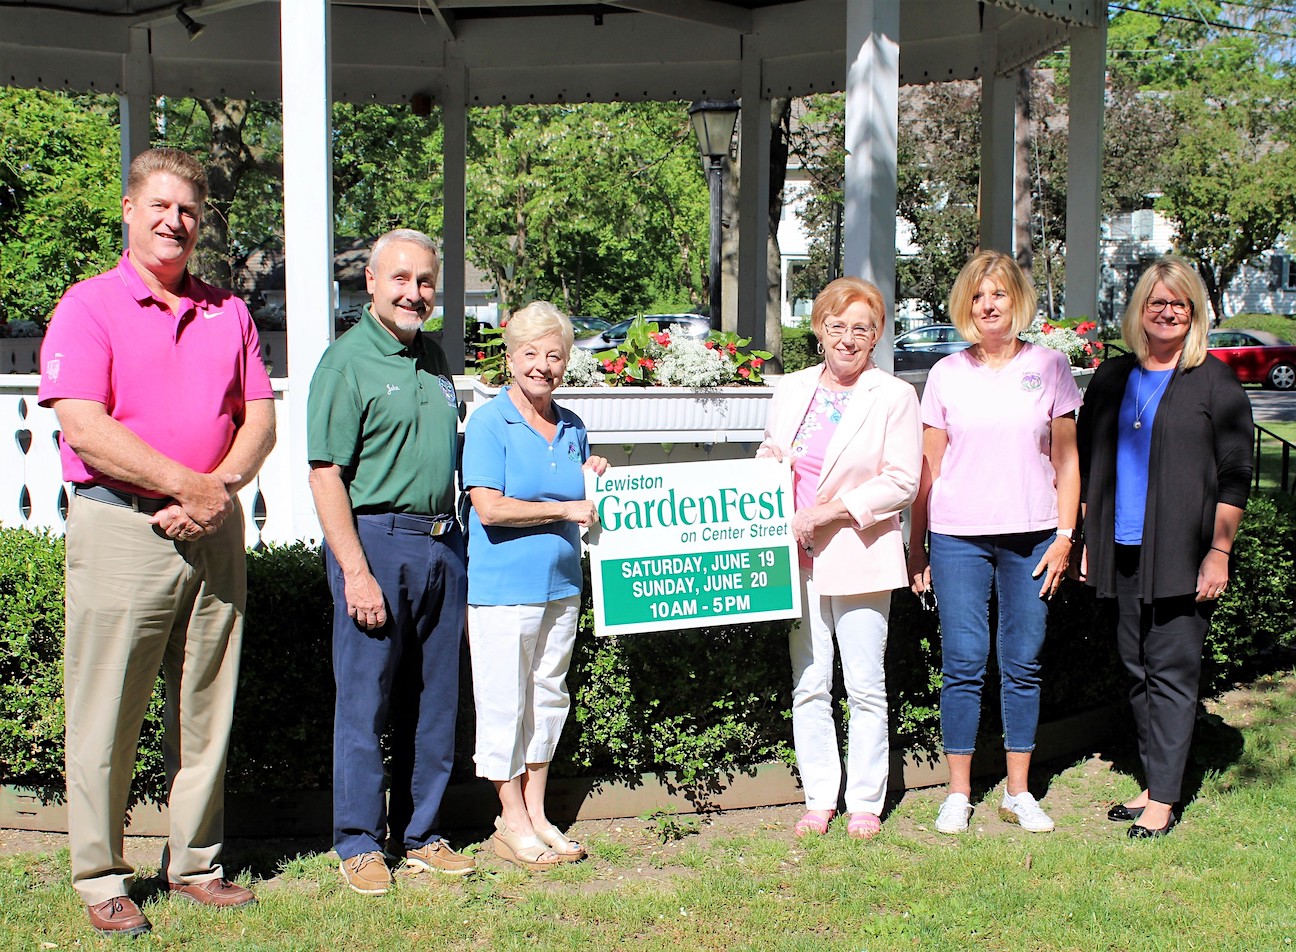 Lewiston Garden Club members reviewed plans for GardenFest 2021 with three of the sponsors for the event that will be held on June 19 and 20. Shown in the photo, from the left, are Town Lewiston of Supervisor Steve Broderick, Councilman John Jacoby, GardenFest grant writer Barbara Carter, Village of Lewiston Mayor Anne Welch, GardenFest Chairwoman Judy Talarico, and Kirsti Hunt, vice president of human resources for Modern Corporation. (Photo by Robert Albee)